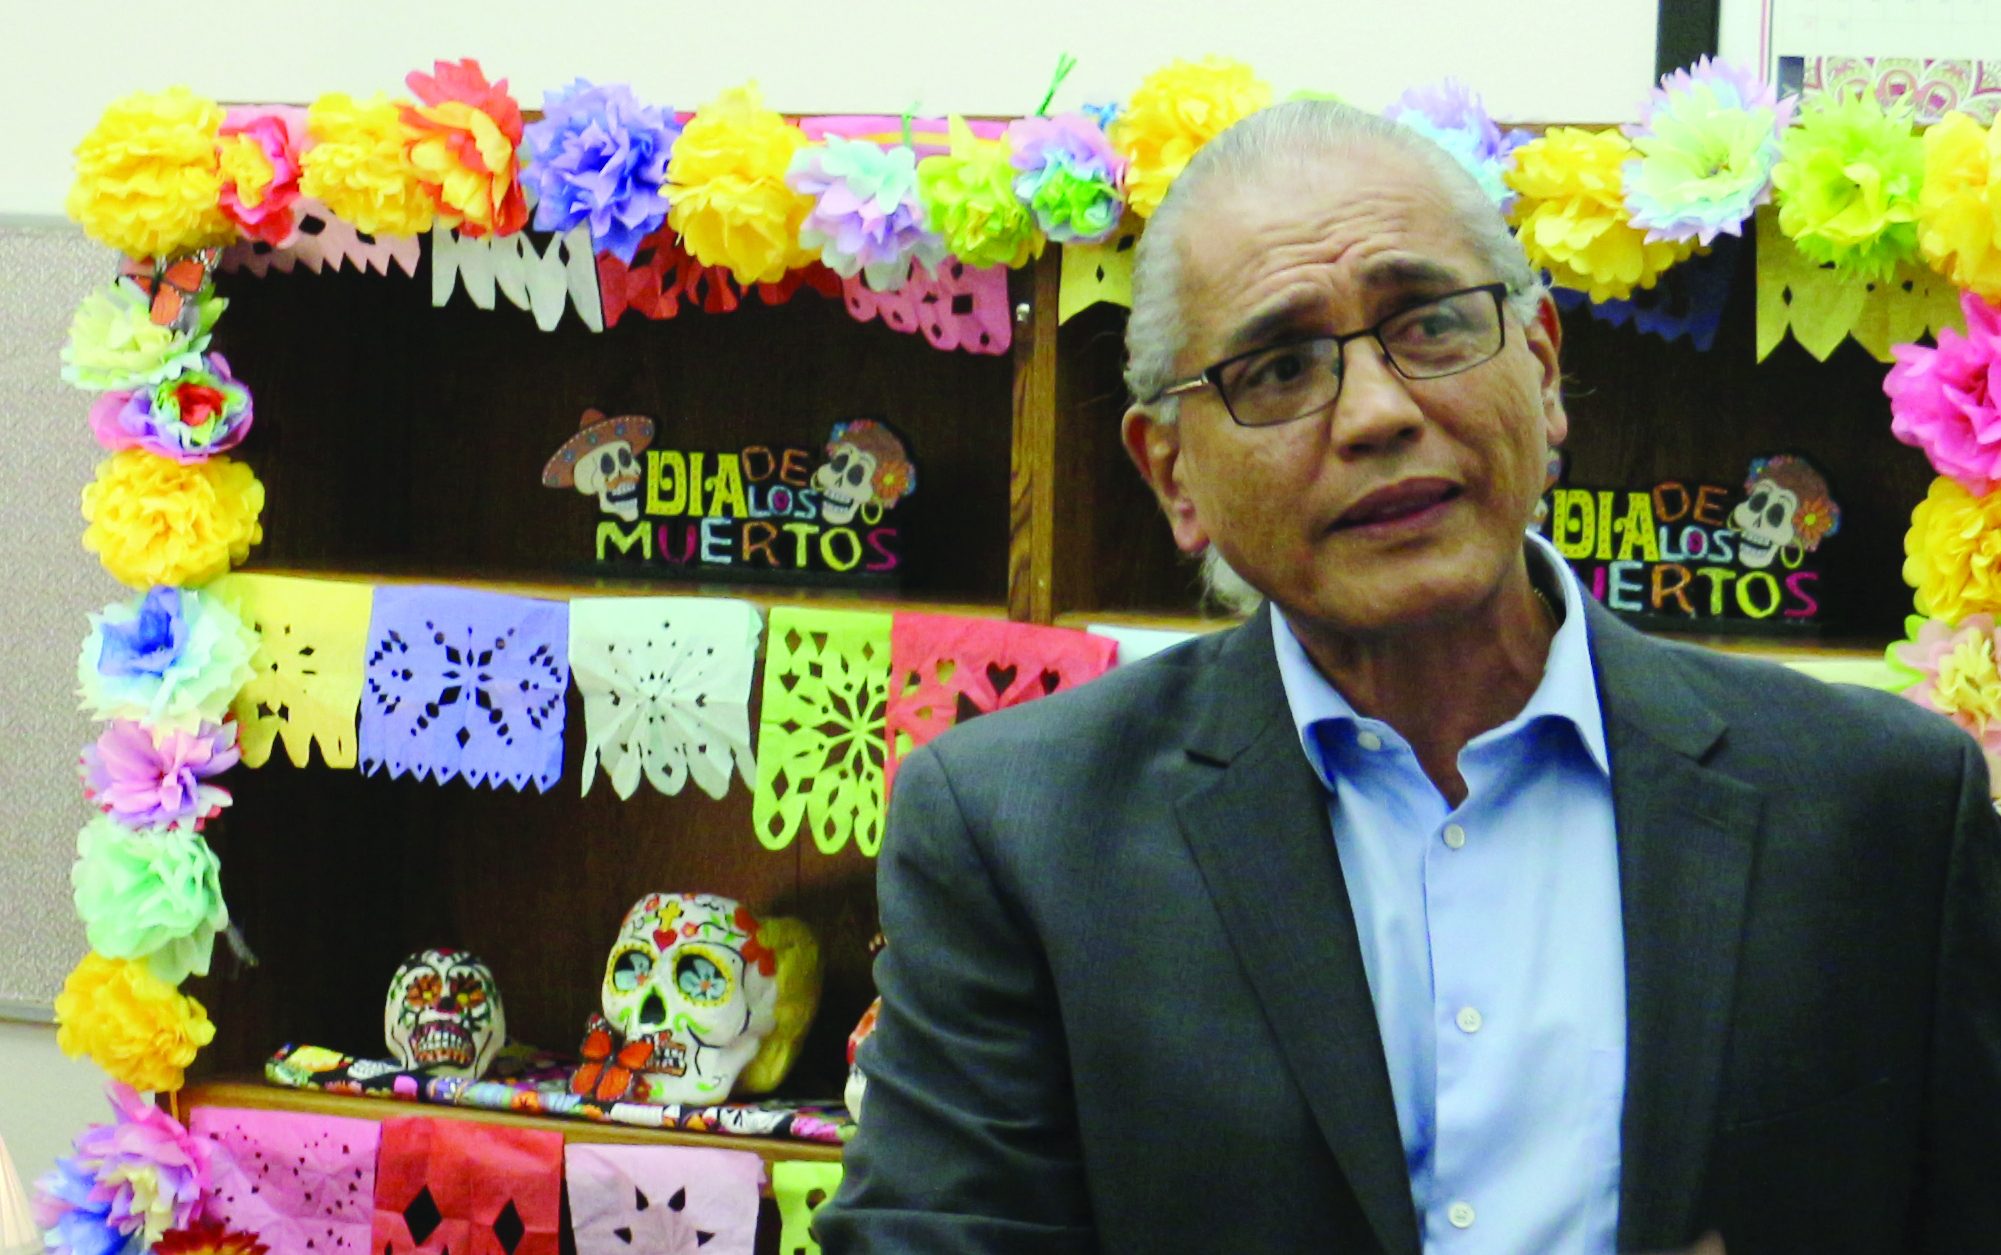 Del Mar College dedicates ofrenda to family and staff lost during pandemic